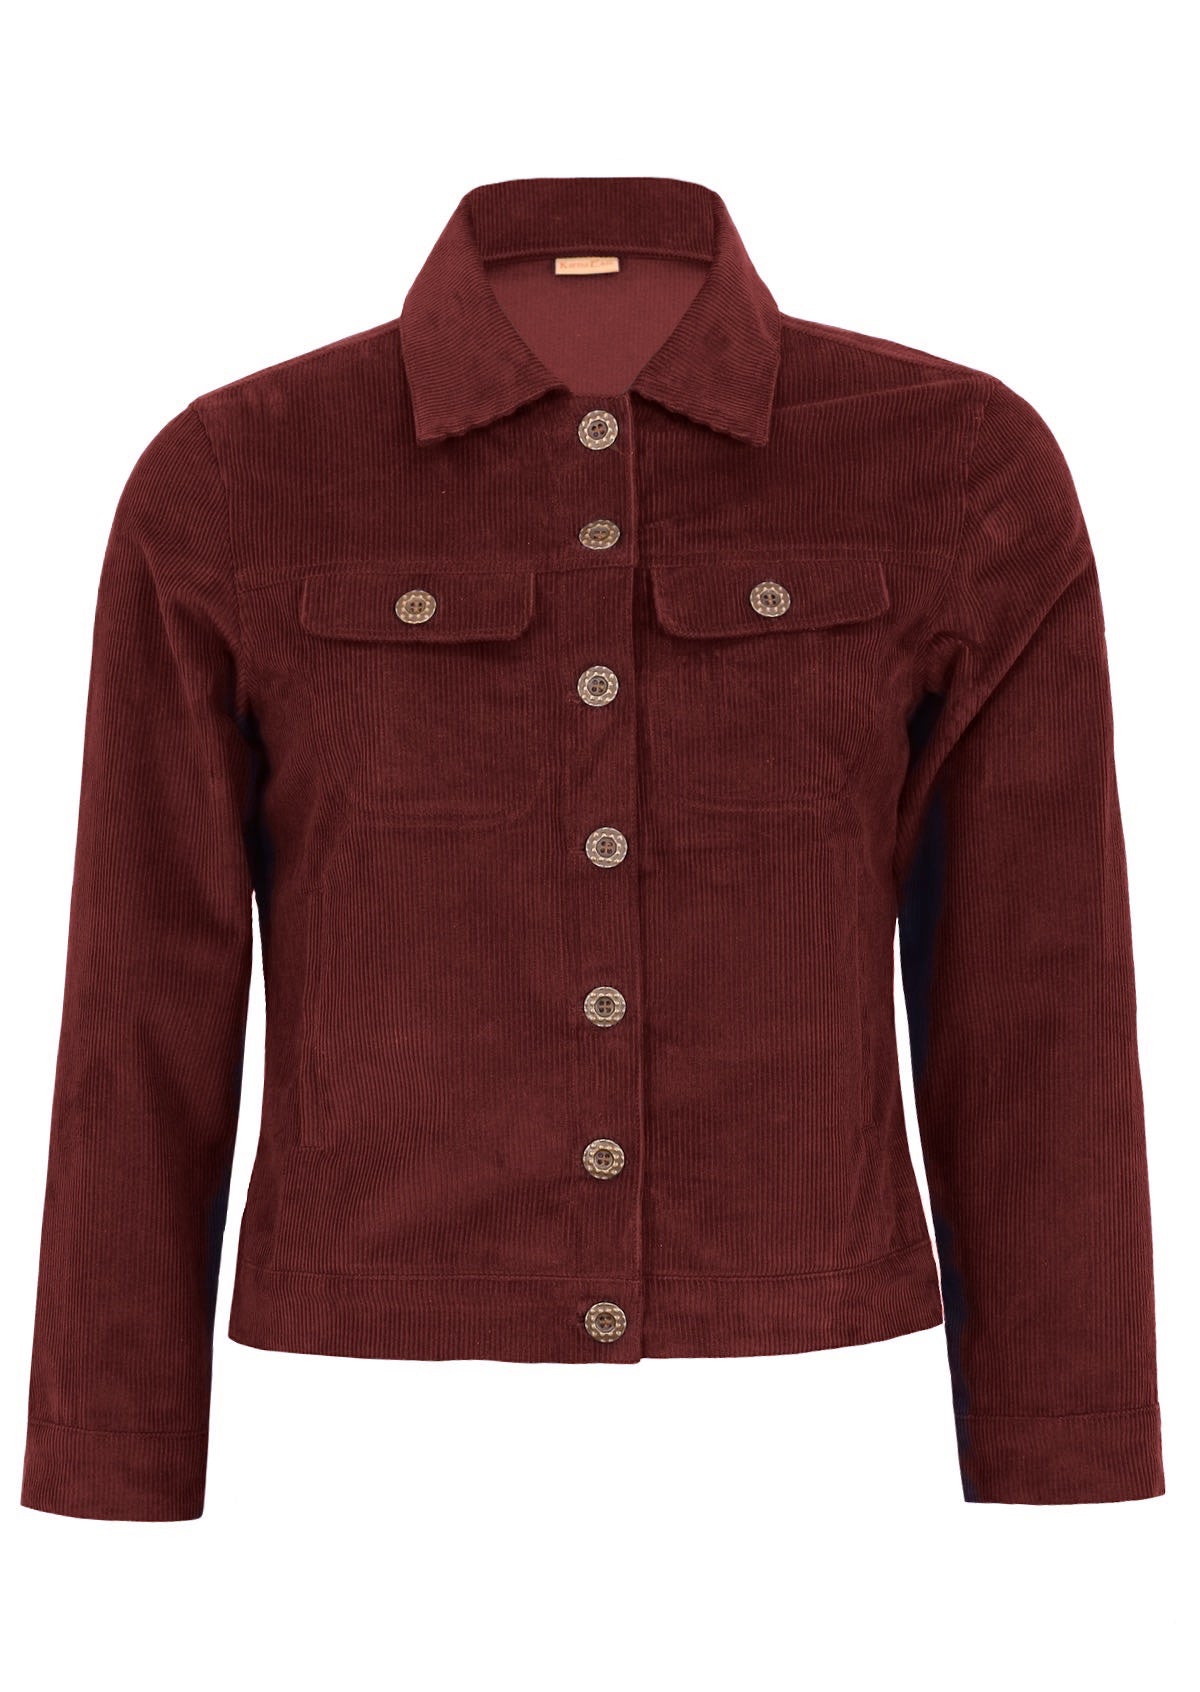 100% cotton corduroy jacket features functional brass buttons. 